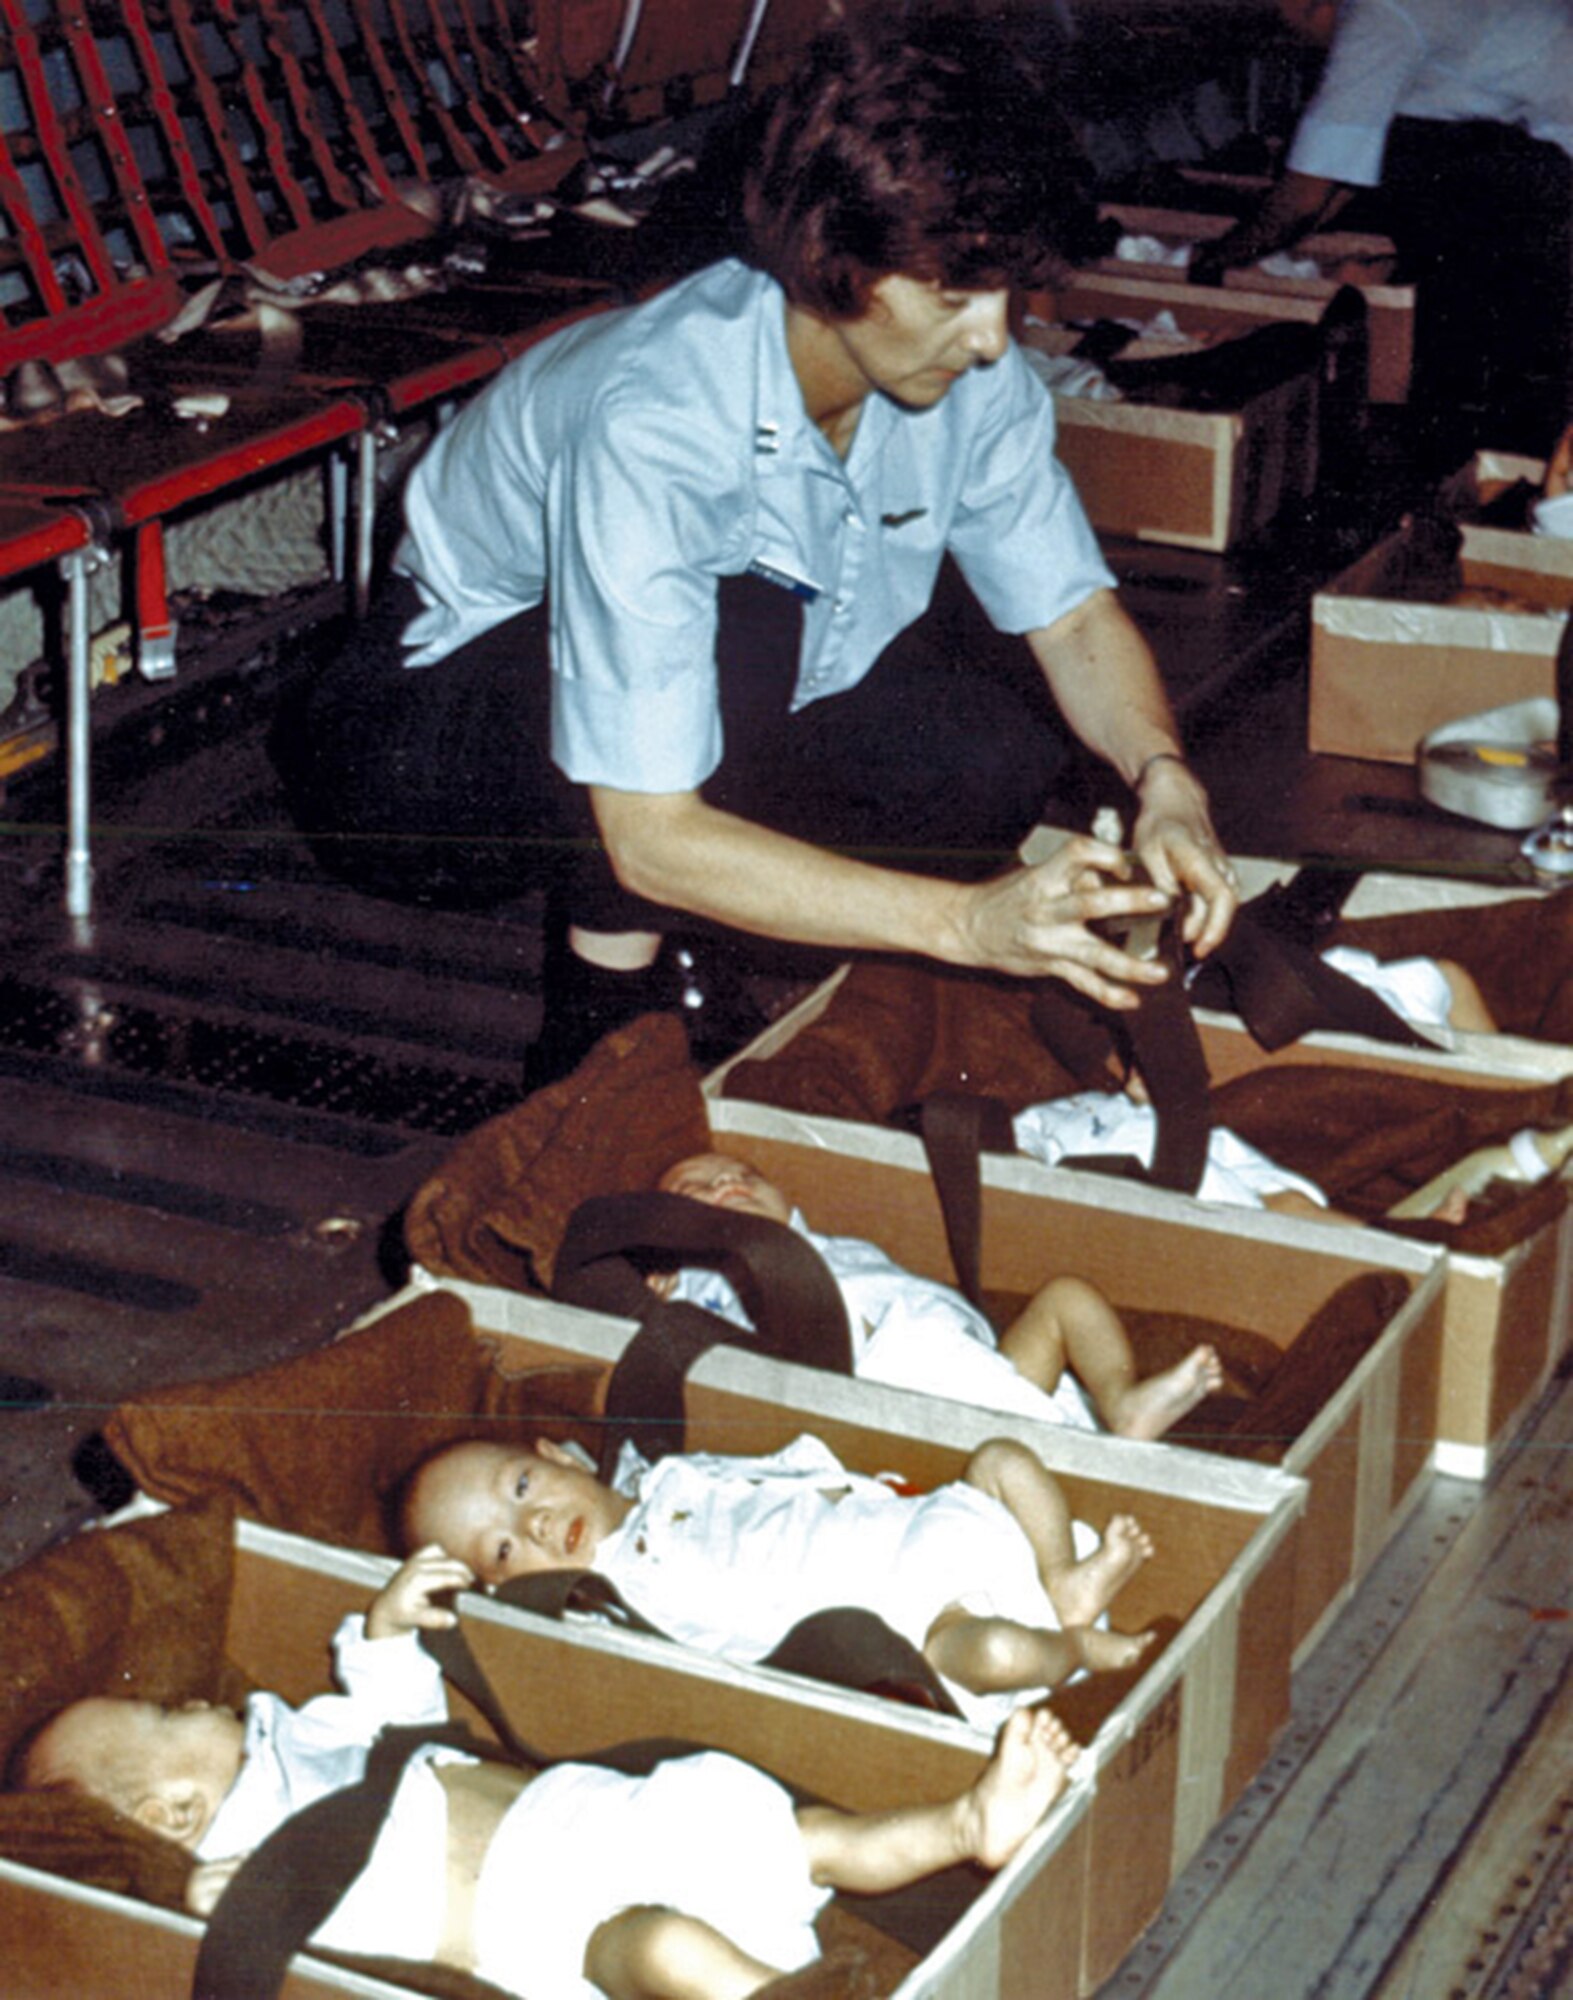 In 1975, the first all Reserve aircrew, commanded by Capt. John E. Tomkins, assisted in the evacuation of refugees from Saigon, South Vietnam. During a 17-day period, a total of five evacuation flights were flown from Saigon to the Philippines and Guam. Cardboard boxes were used to carry infants.   (Air Force File Photo)